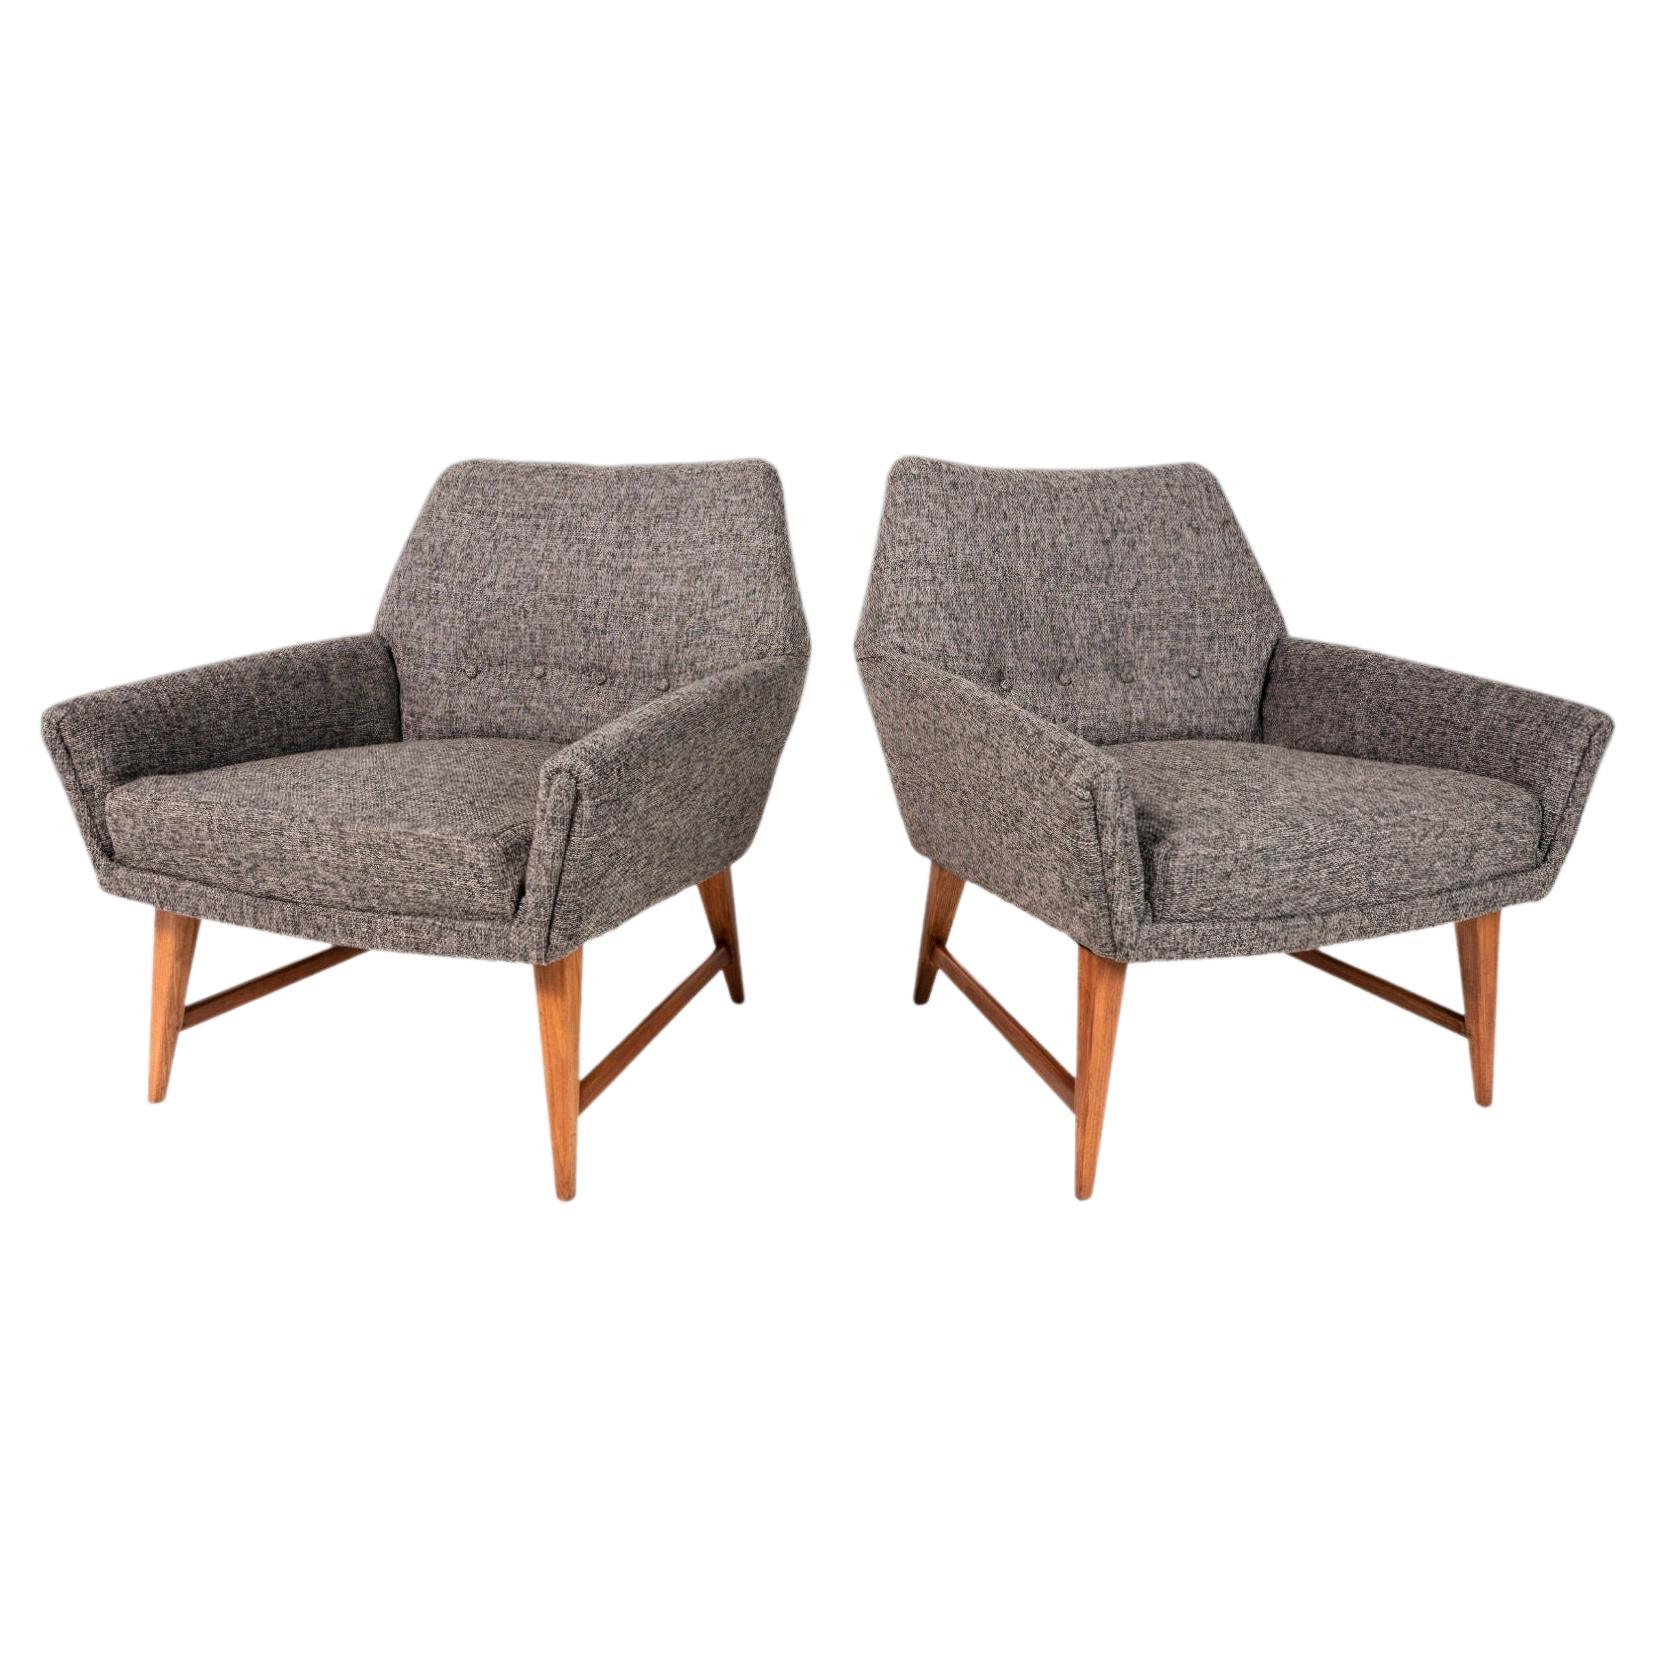 Set of Two '2' Restored Angular Lounge Chairs After Gio Ponti, Italy, c. 1960's For Sale